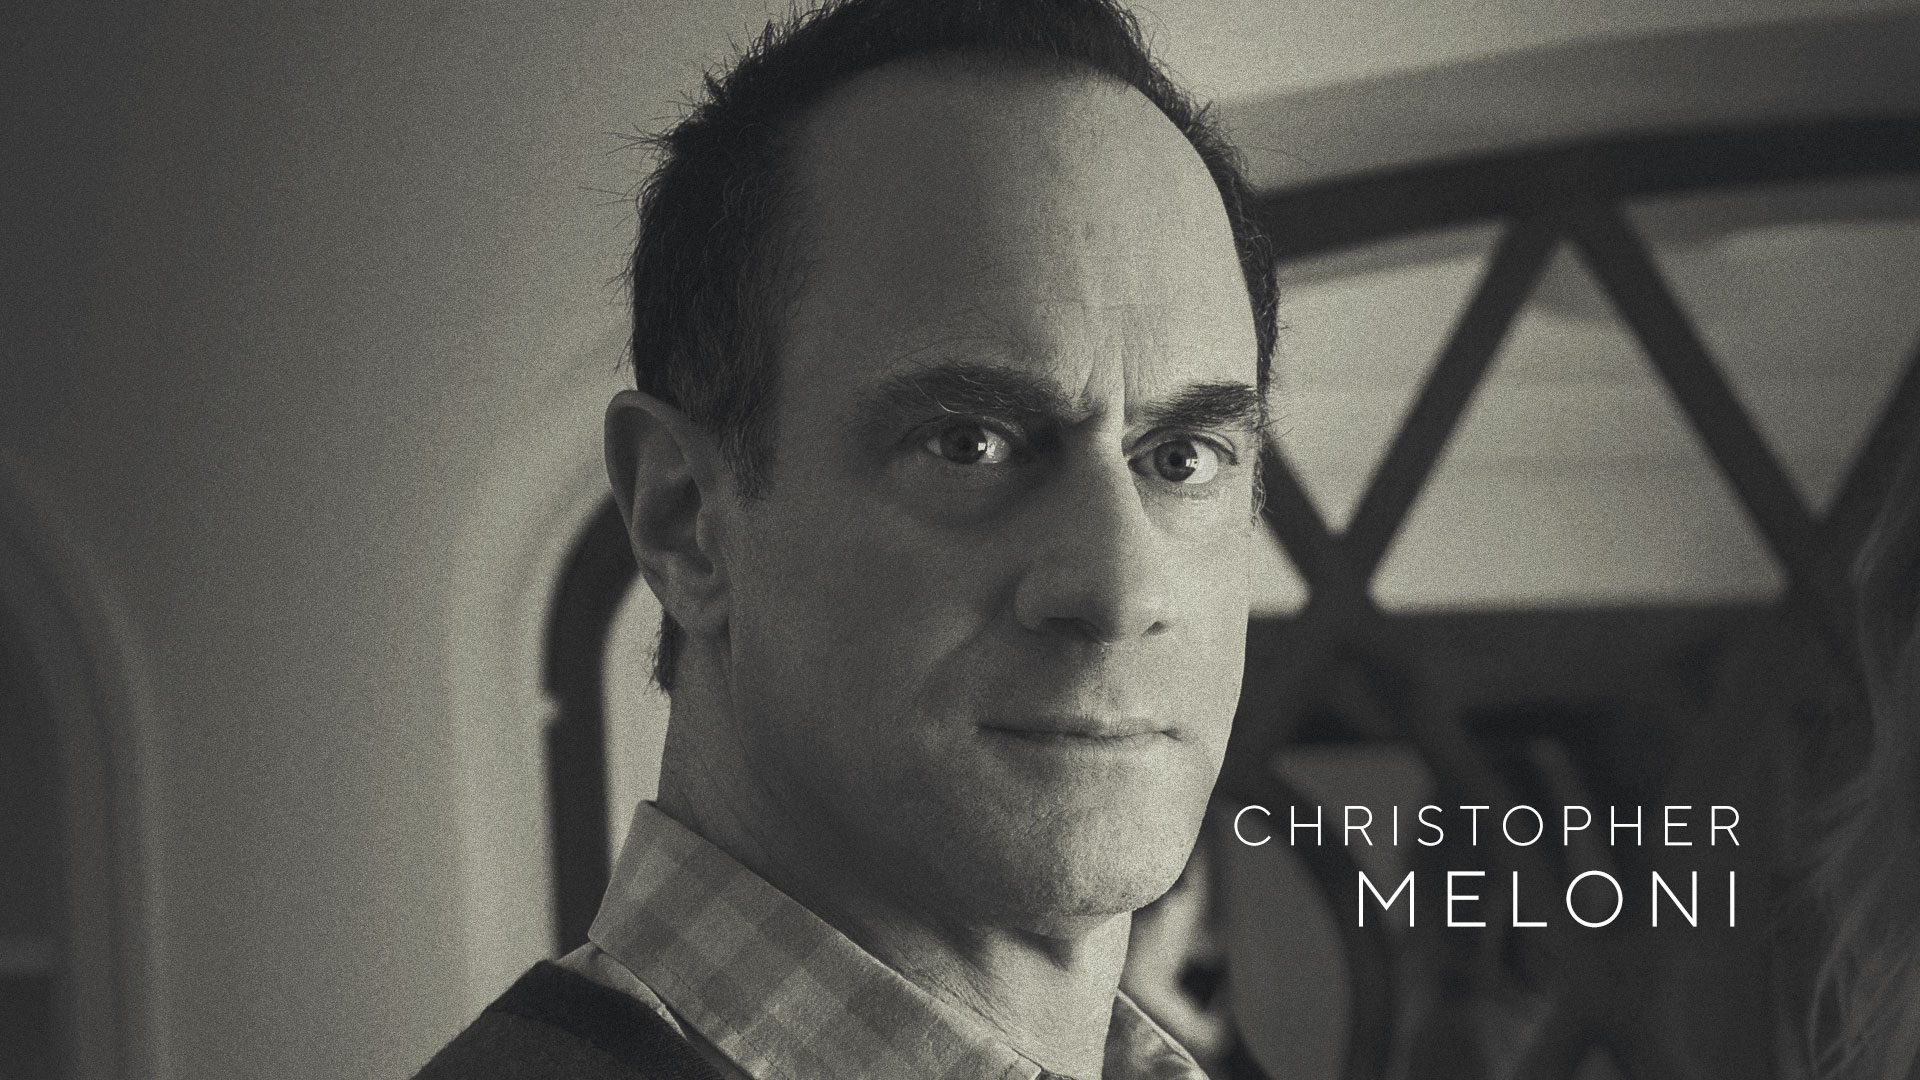 Christopher Meloni as Robert in 